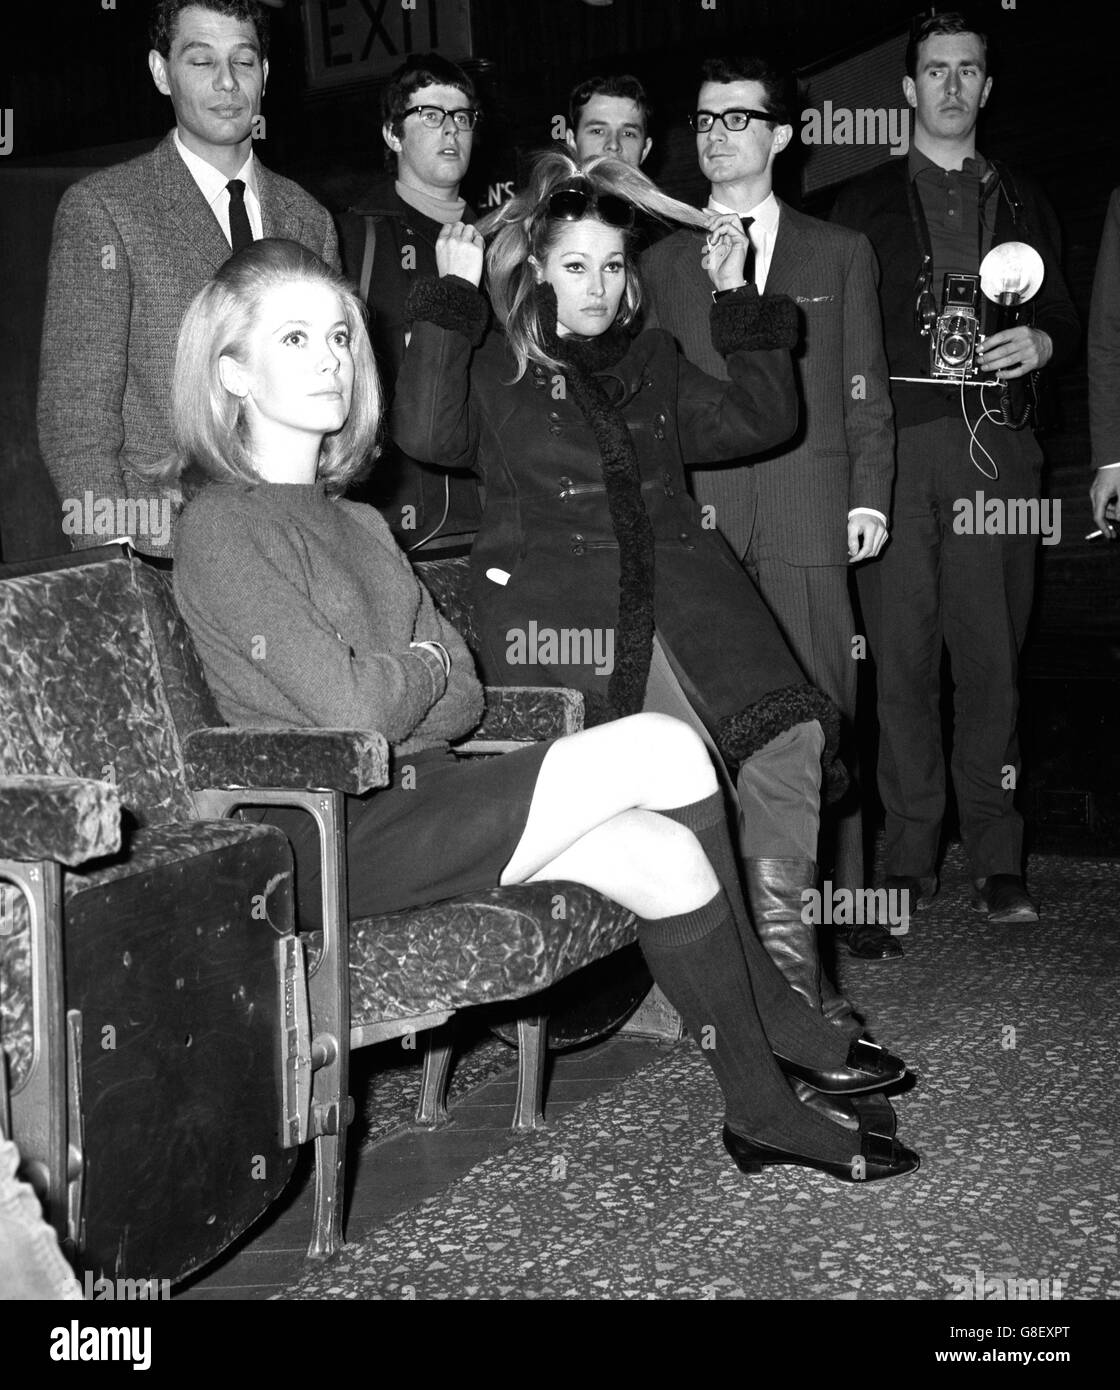 Ursula Andress (right) waits with Catherine Deneuve for their turn to rehearse at the Odeon, Leicester Square, for tomorrow's stage show of stars at the Royal Film Performance. The film to be shown to the Queen will be Born Free. Stock Photo